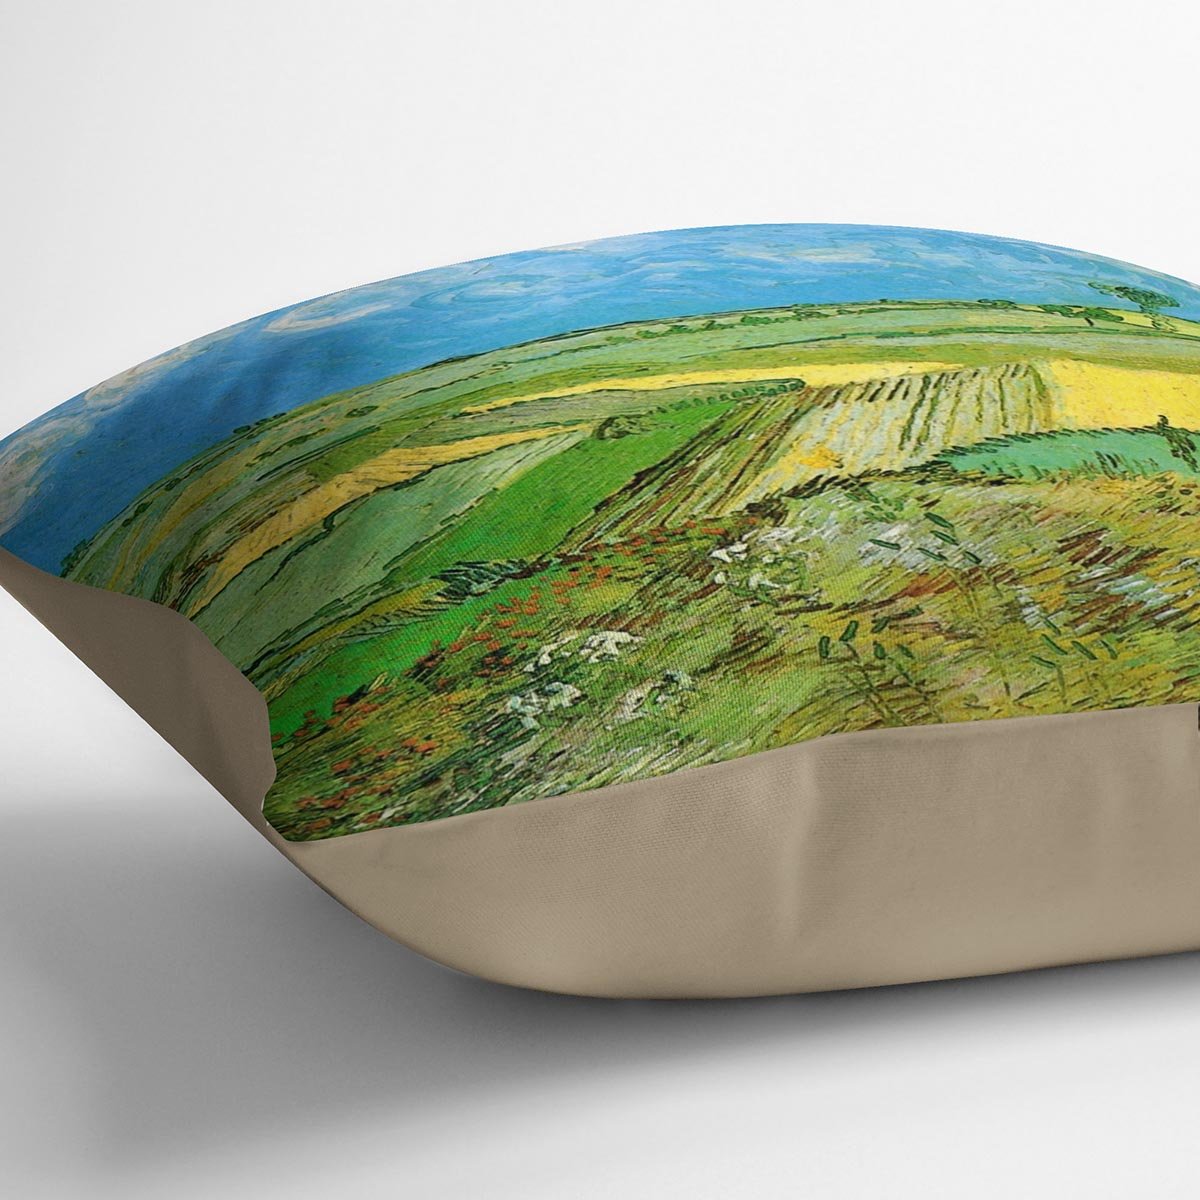 Wheat Fields at Auvers Under Clouded Sky by Van Gogh Throw Pillow